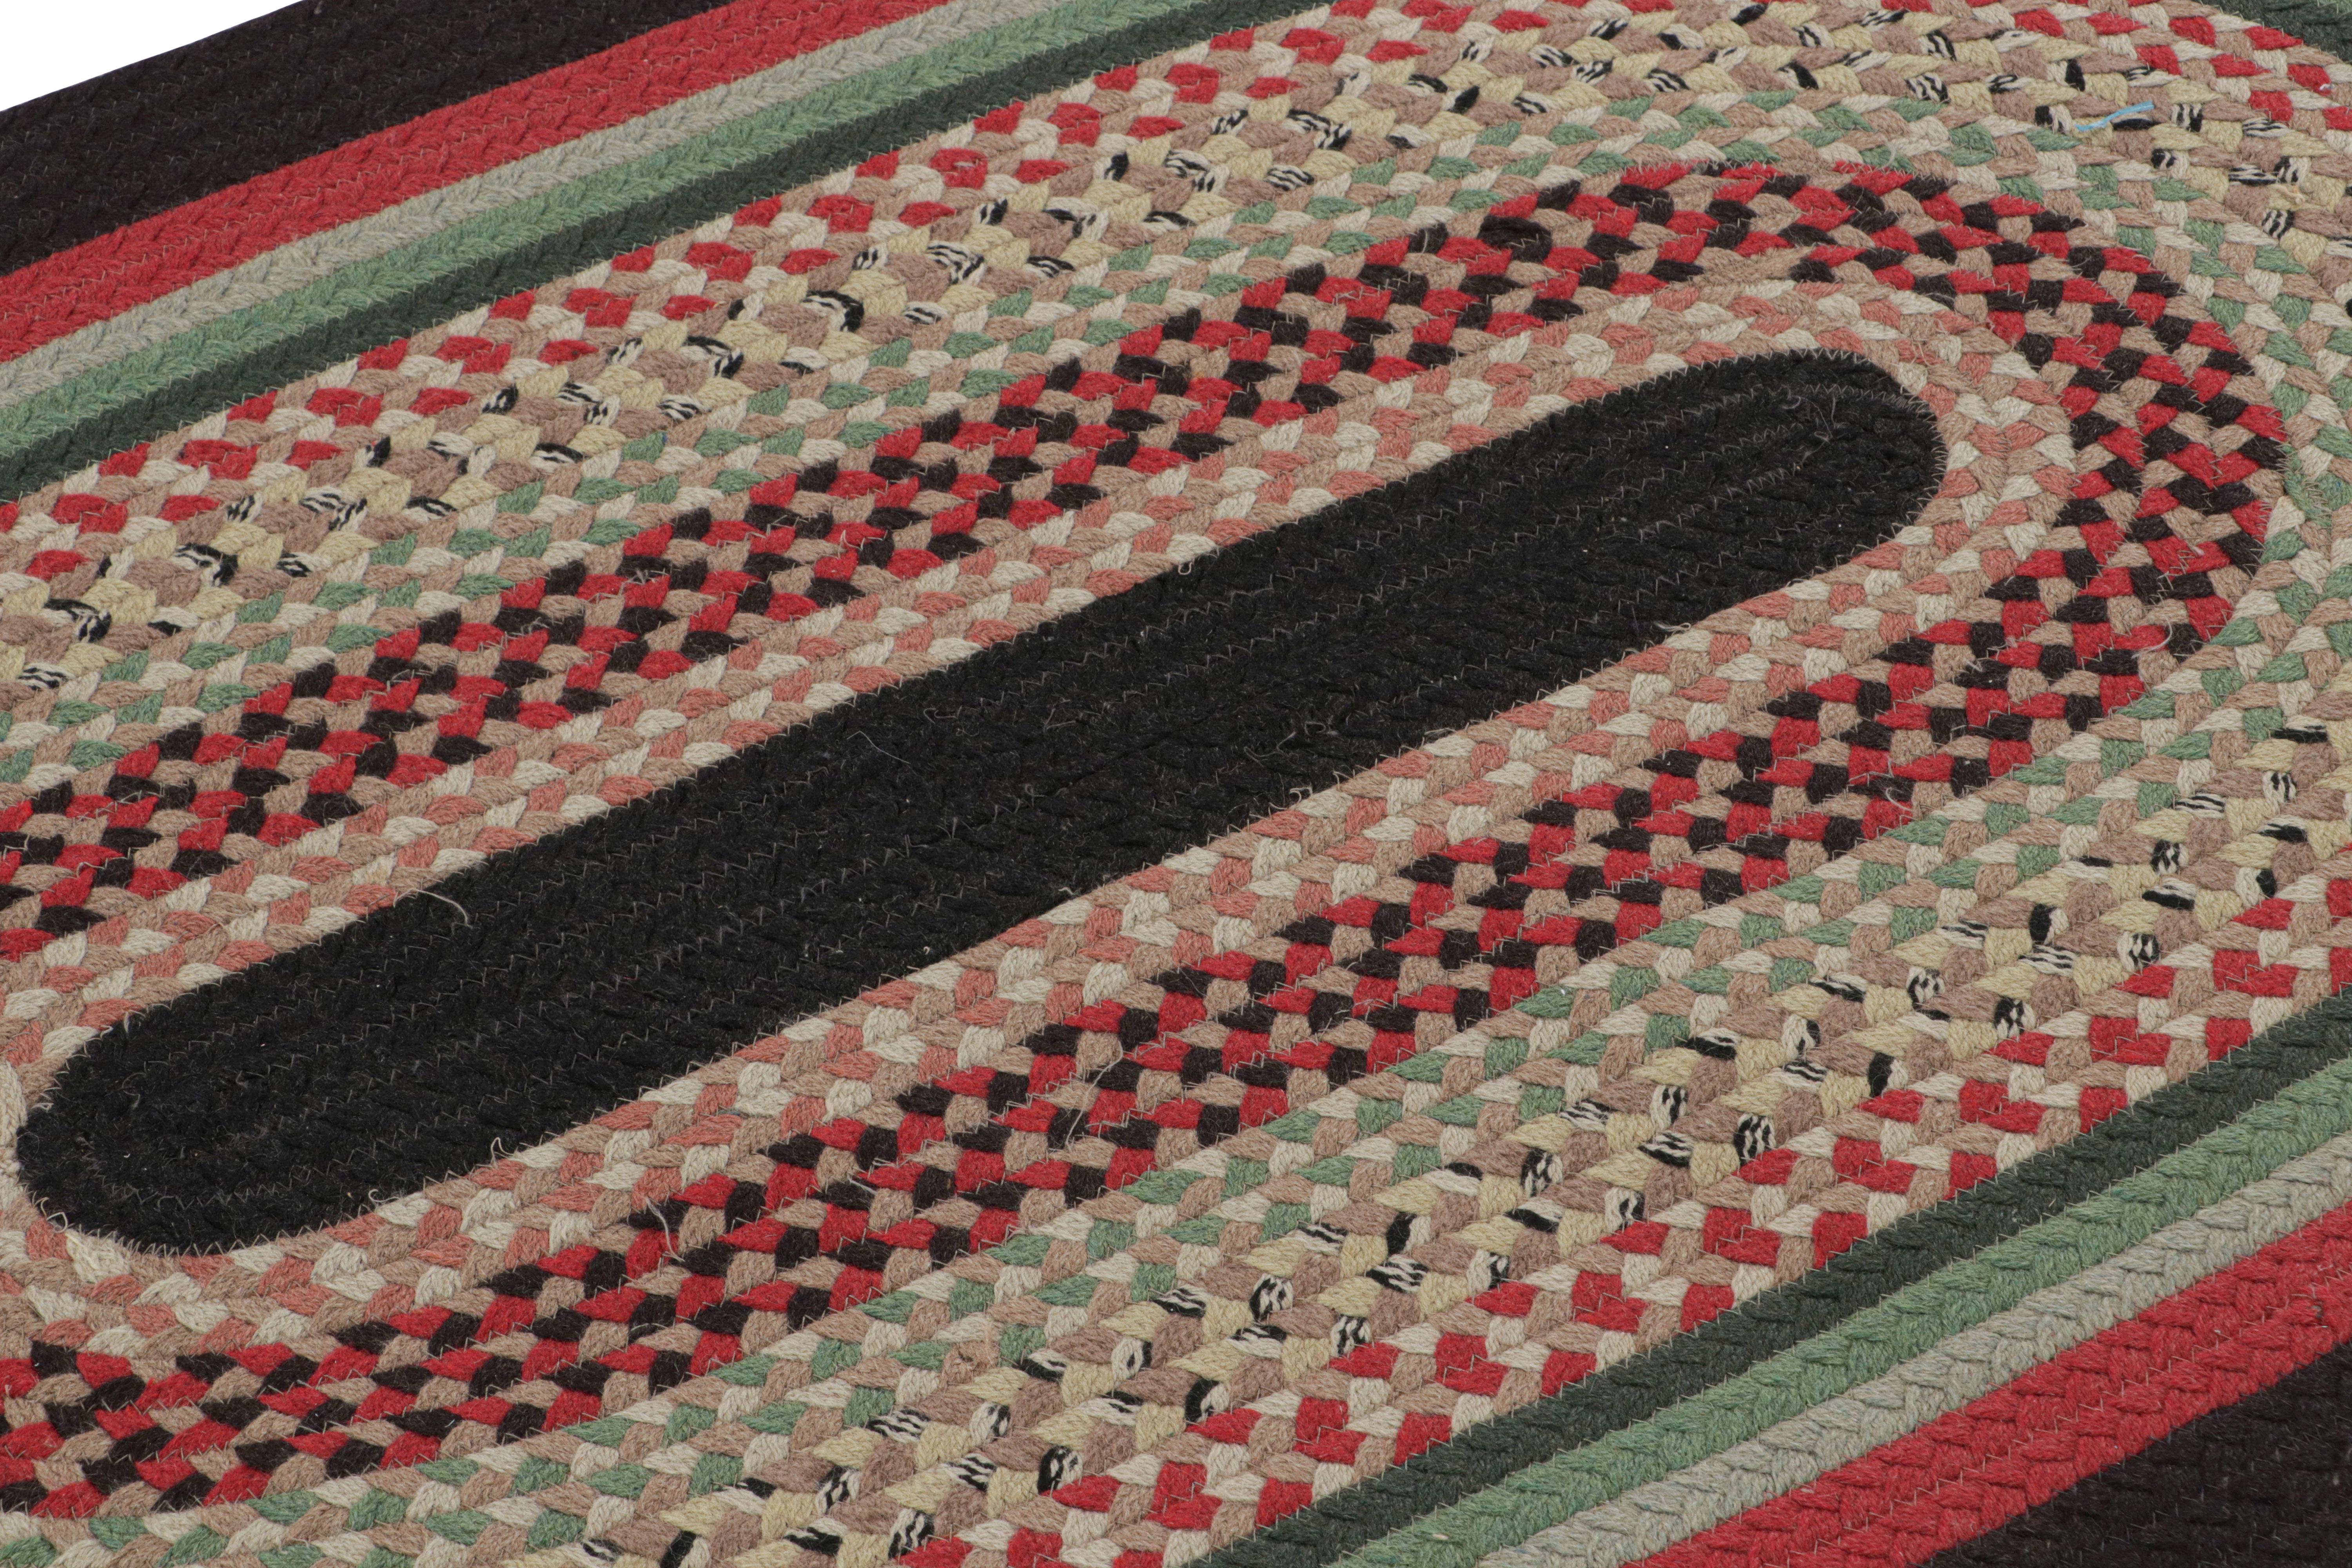 Hand-Knotted Antique Hooked Oval Rug with Polychromatic Braided Stripes, from Rug & Kilim